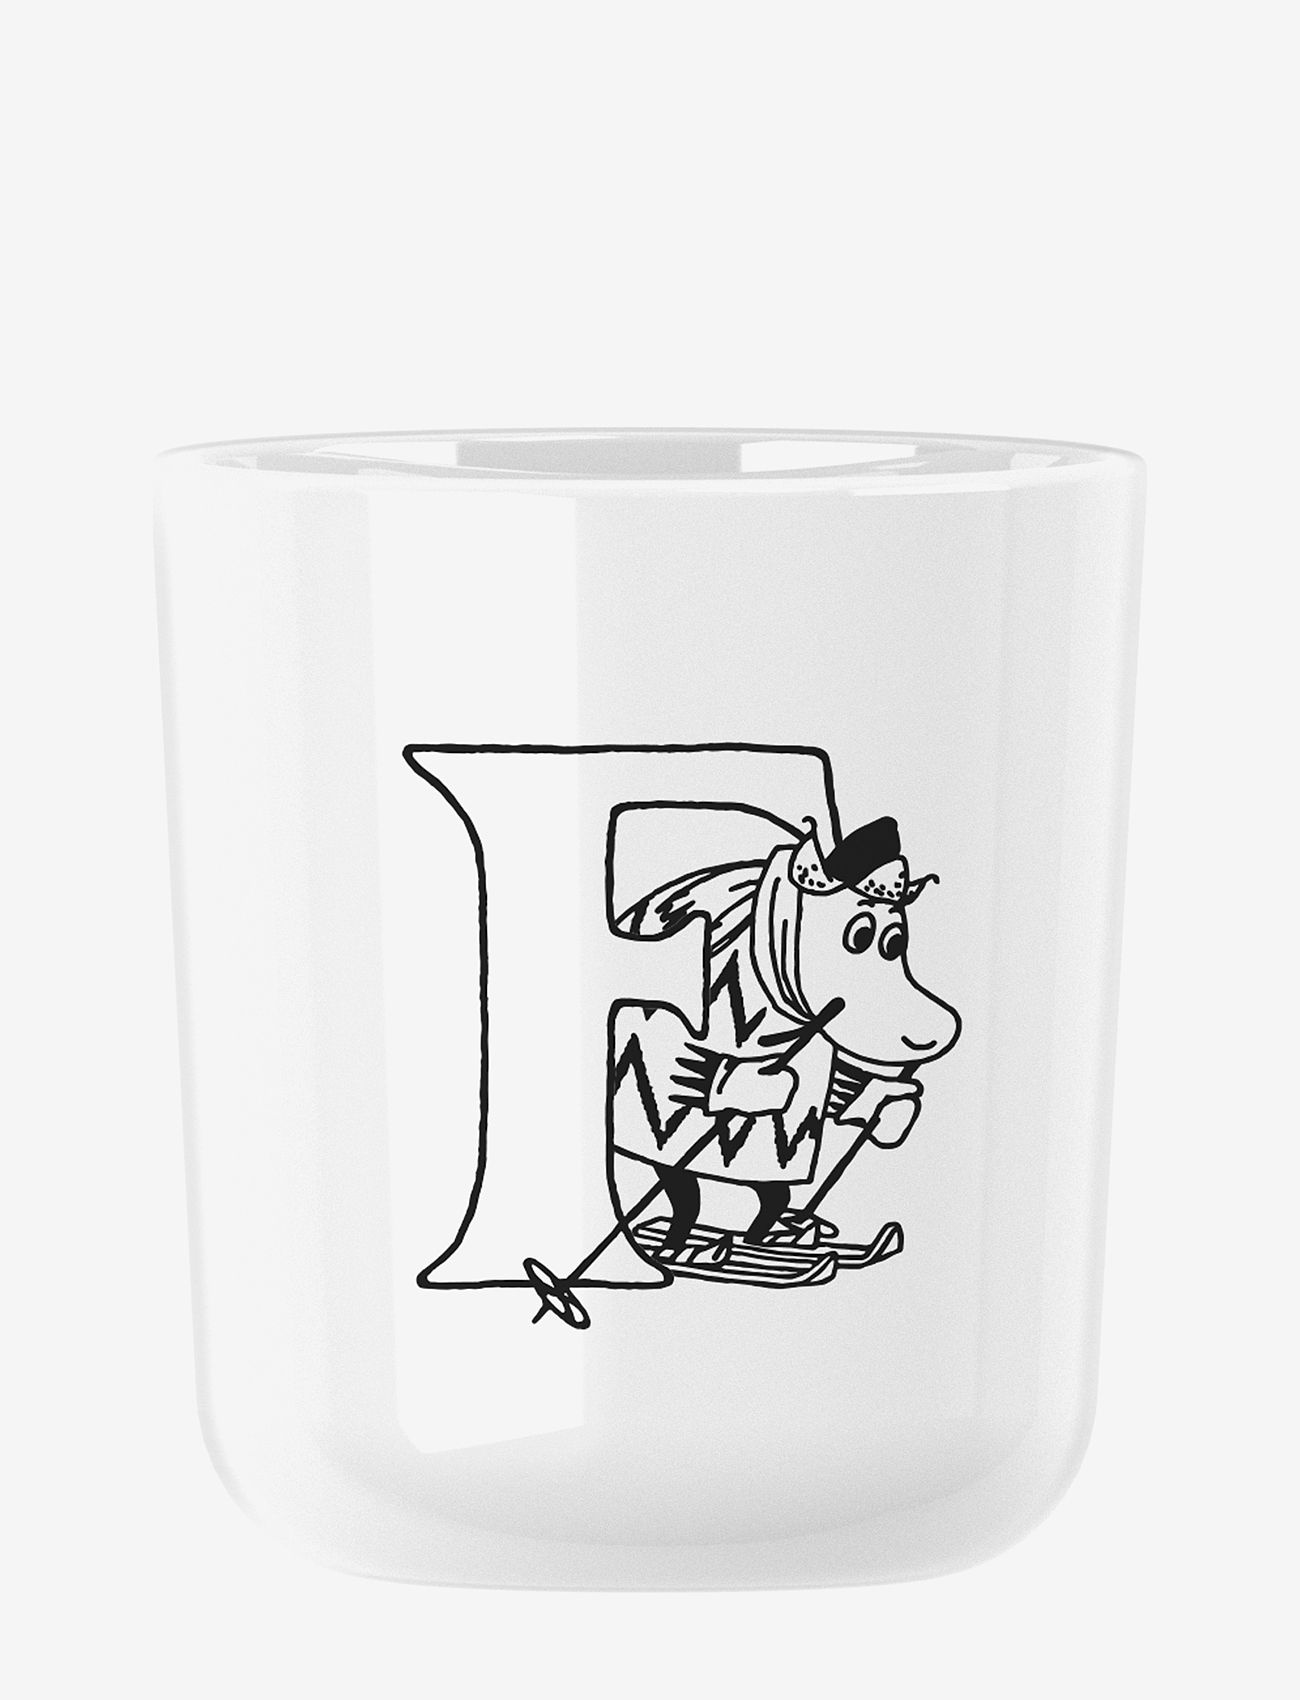 RIG-TIG - Moomin ABC mugg - F 0.2 l. Moomin white - lowest prices - white - 0